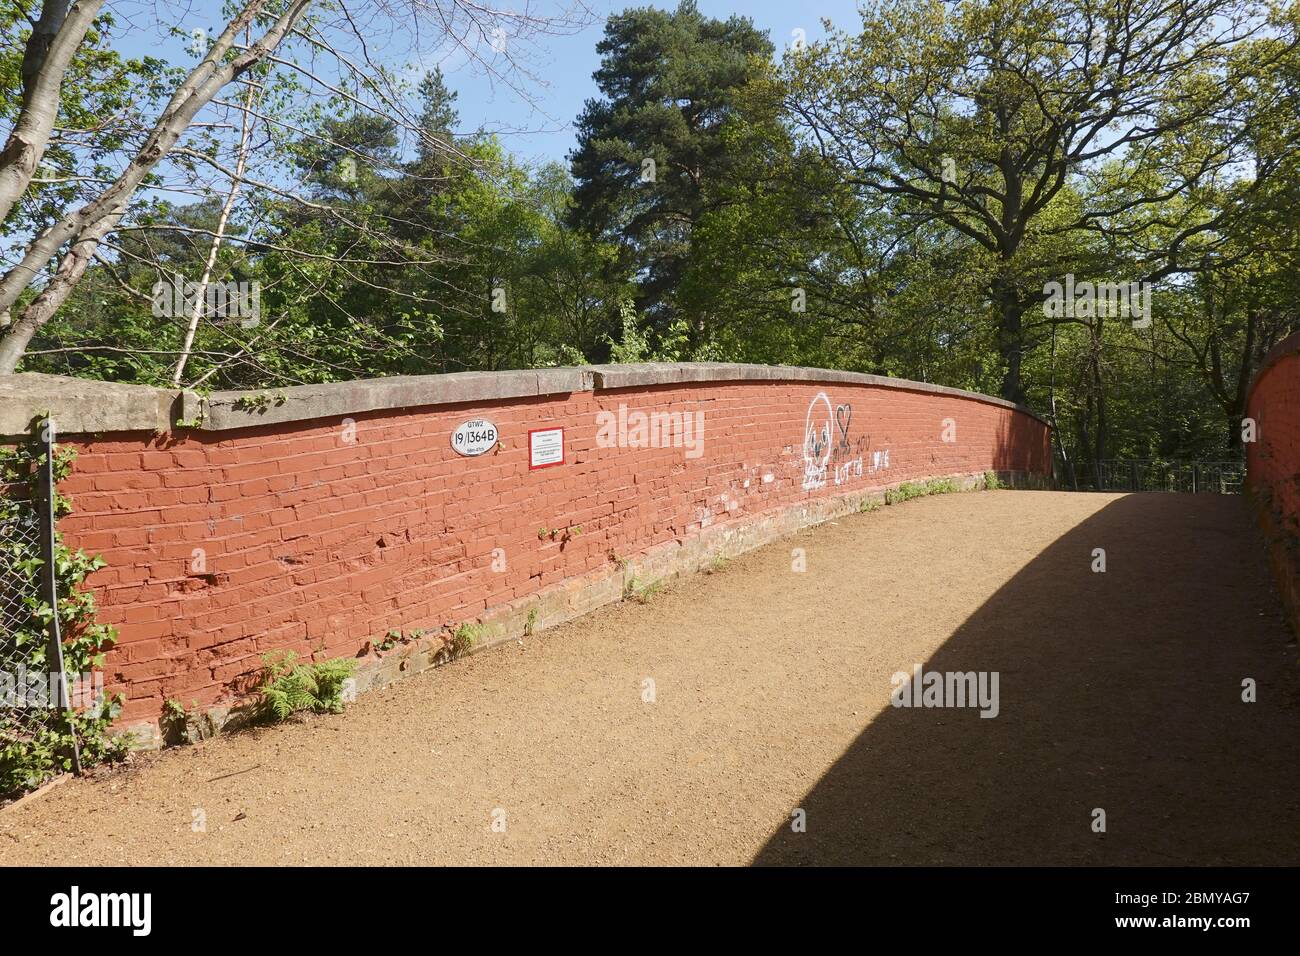 Kiln Bridge over the Railway between Sandhurst & Crowthorne, recently reopened to replace Harvey's Level Crossing which has been closed. Stock Photo